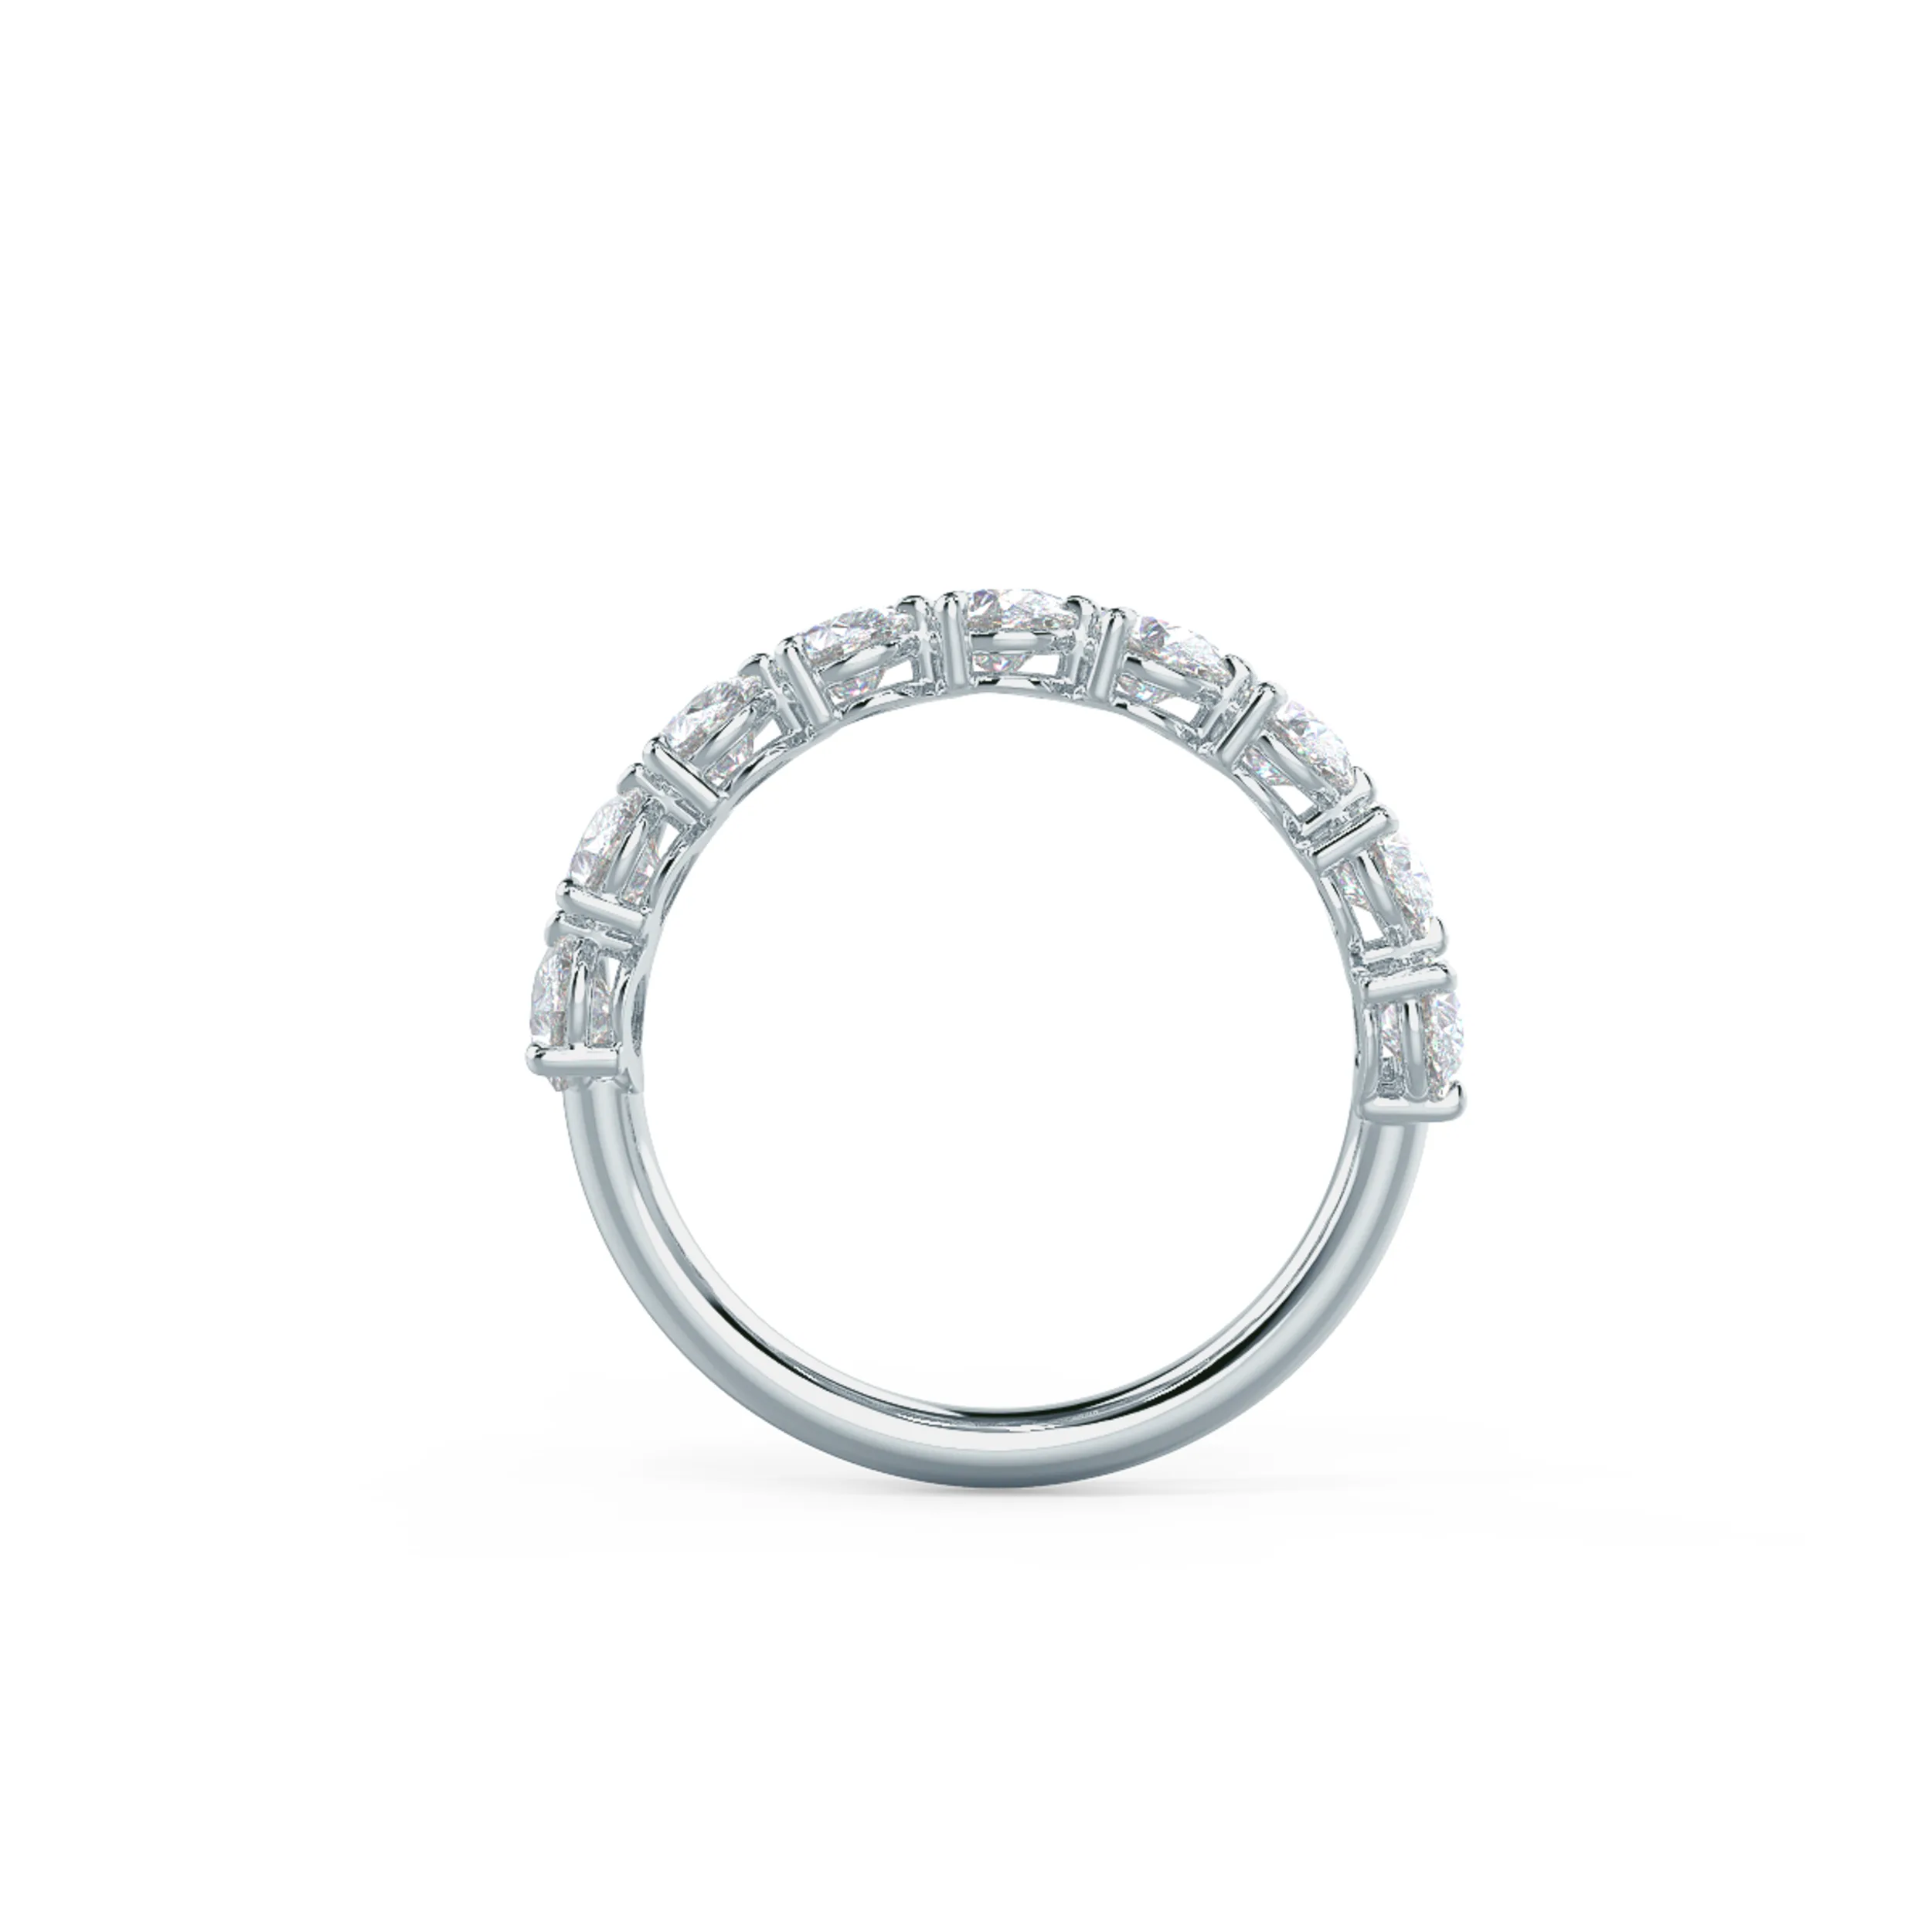 White Gold Pear Angled Half Band featuring 2.5 Carat Lab Grown Diamonds (Profile View)